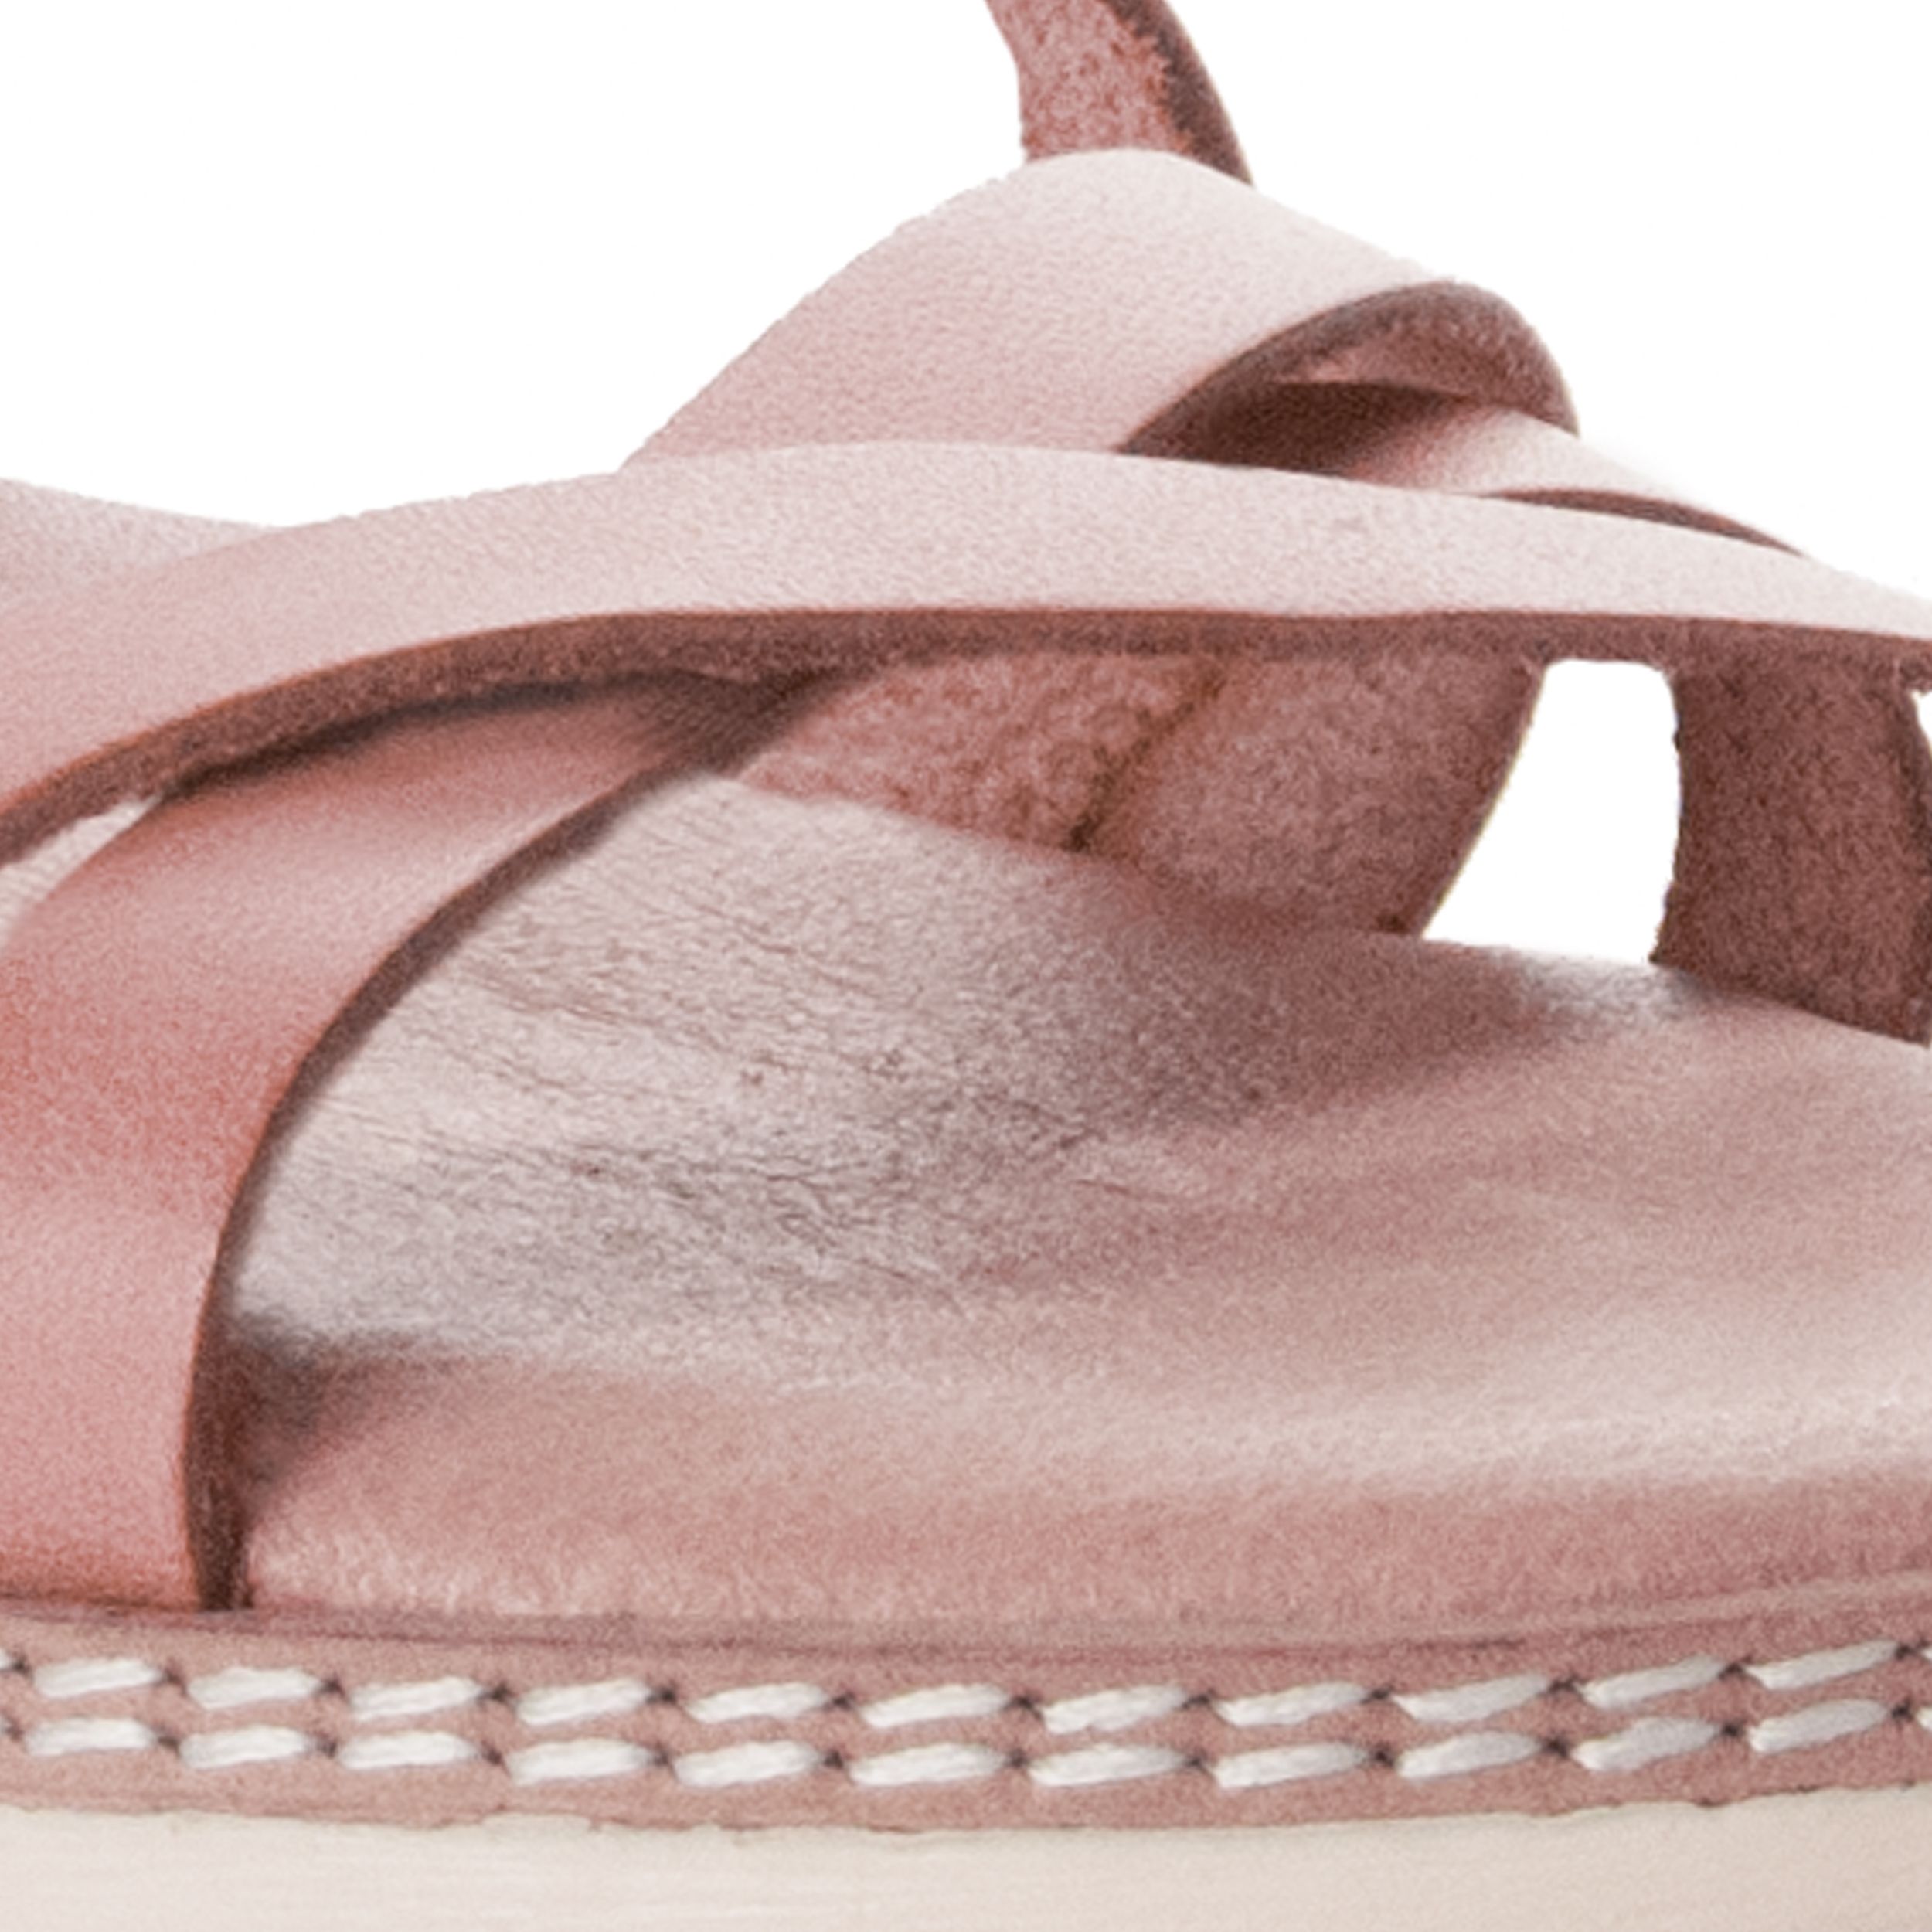 Special edition Comodoo. Natural skin wedge sandal, with maximum comfort on the plant, by its gel, soft and padded template. It looked like you walk on a mattress. Anatomical Closure of buckle, of good quality. Anti-slip sole. Very summer for his style. Made in Spain.